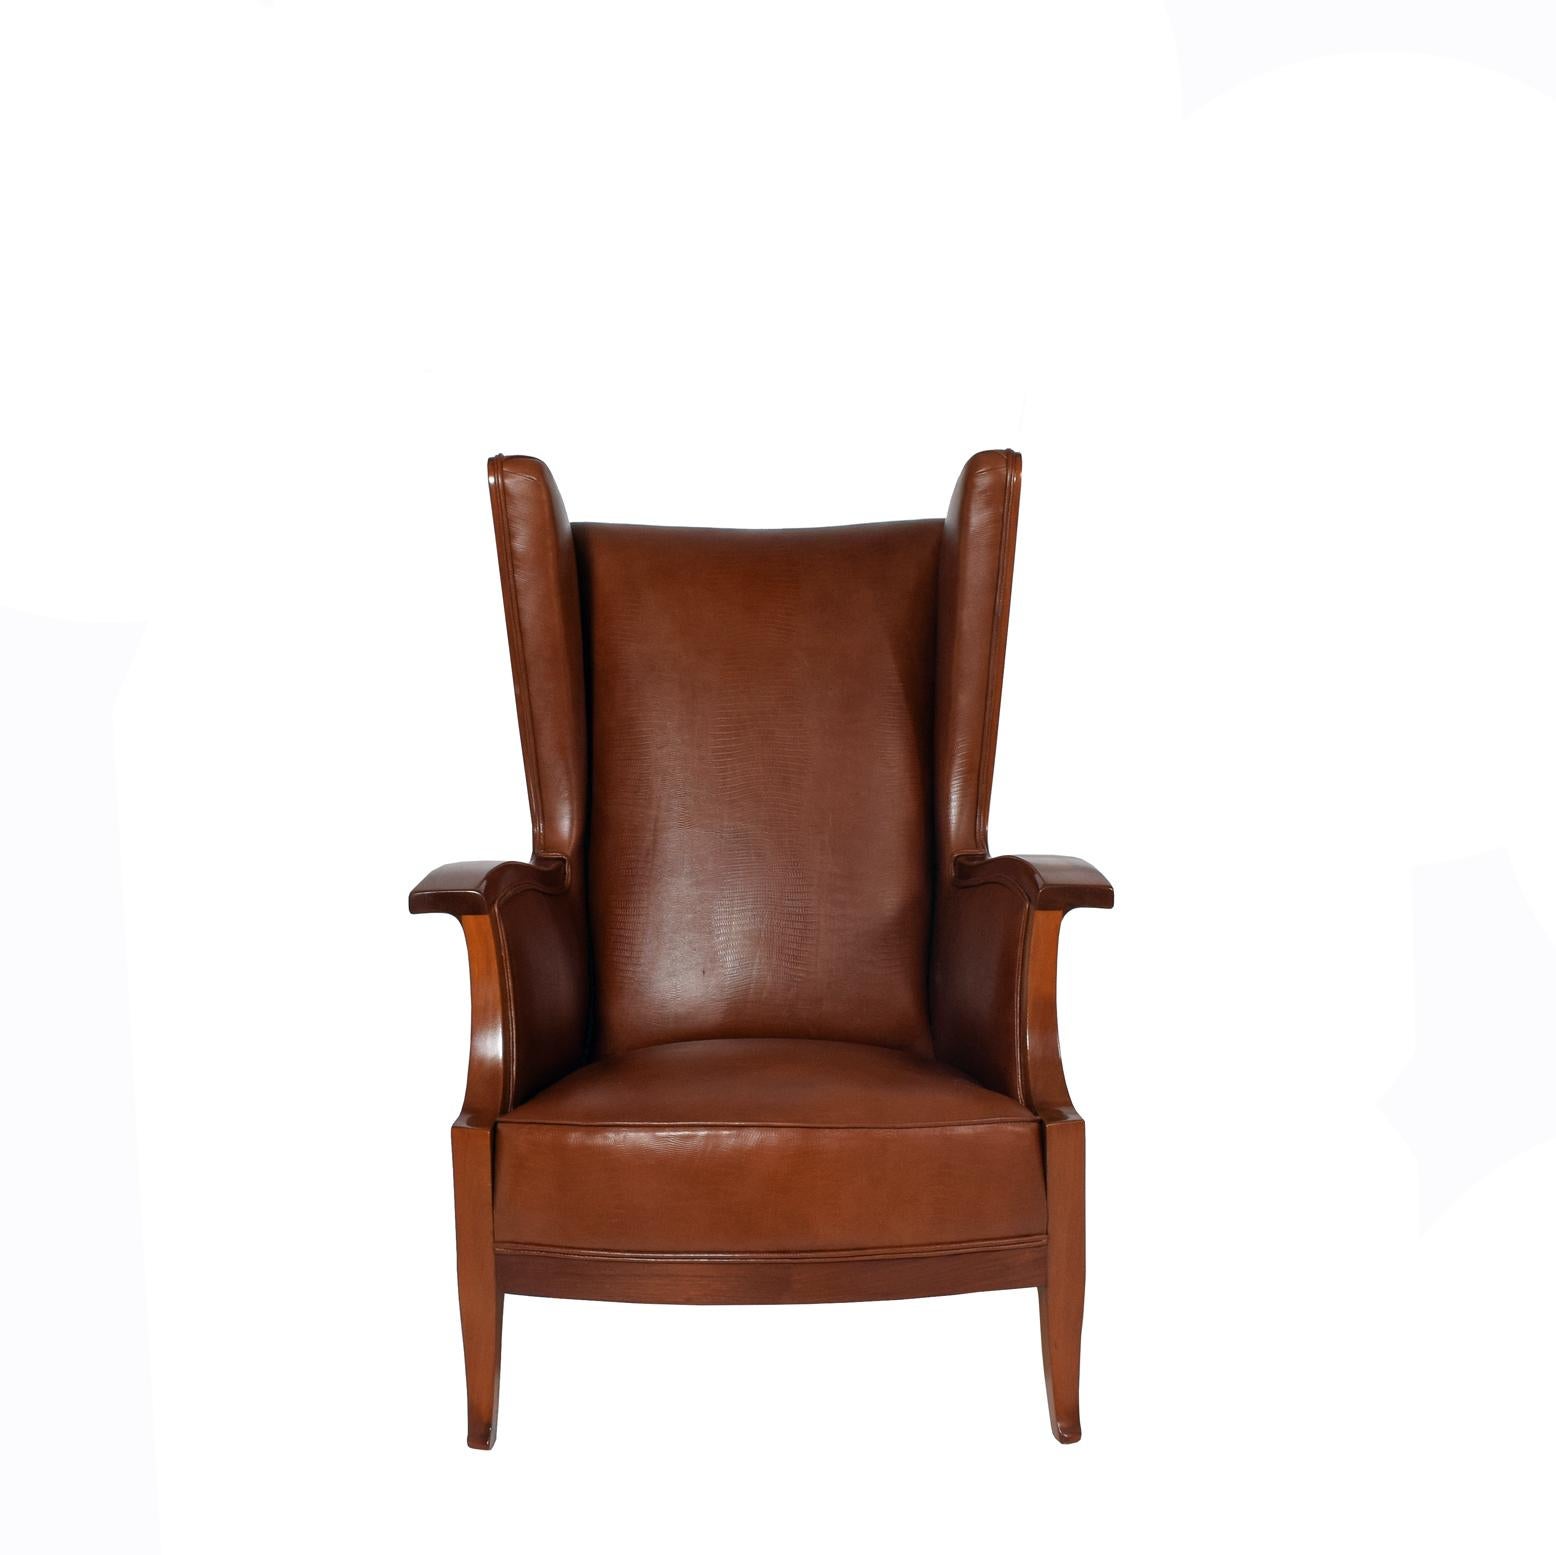 1940s wingback chair